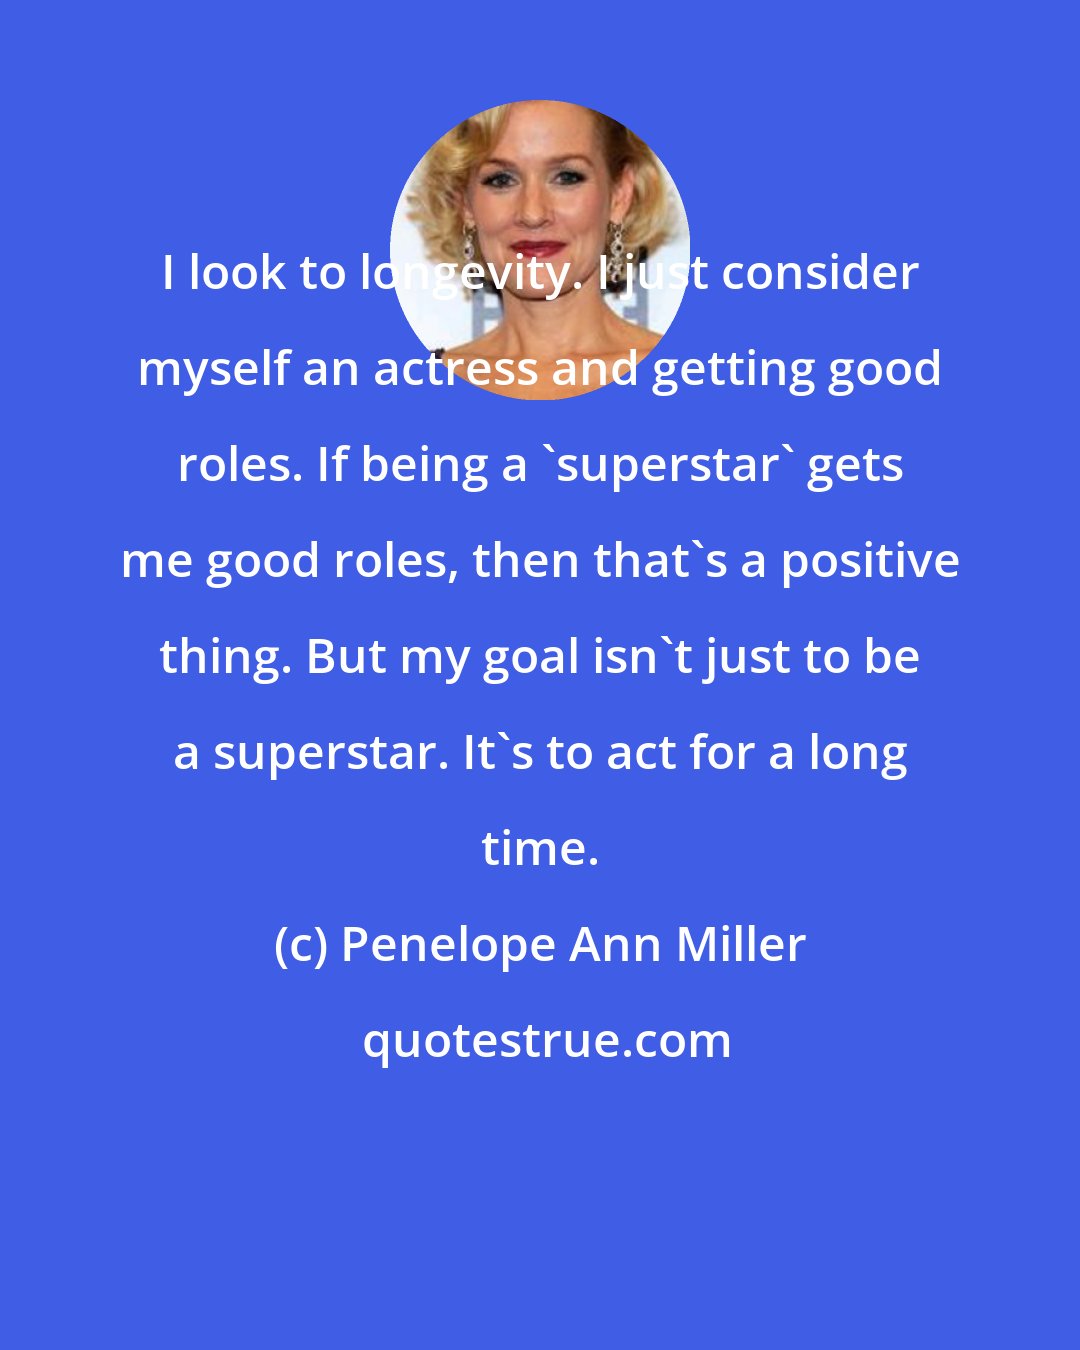 Penelope Ann Miller: I look to longevity. I just consider myself an actress and getting good roles. If being a 'superstar' gets me good roles, then that's a positive thing. But my goal isn't just to be a superstar. It's to act for a long time.